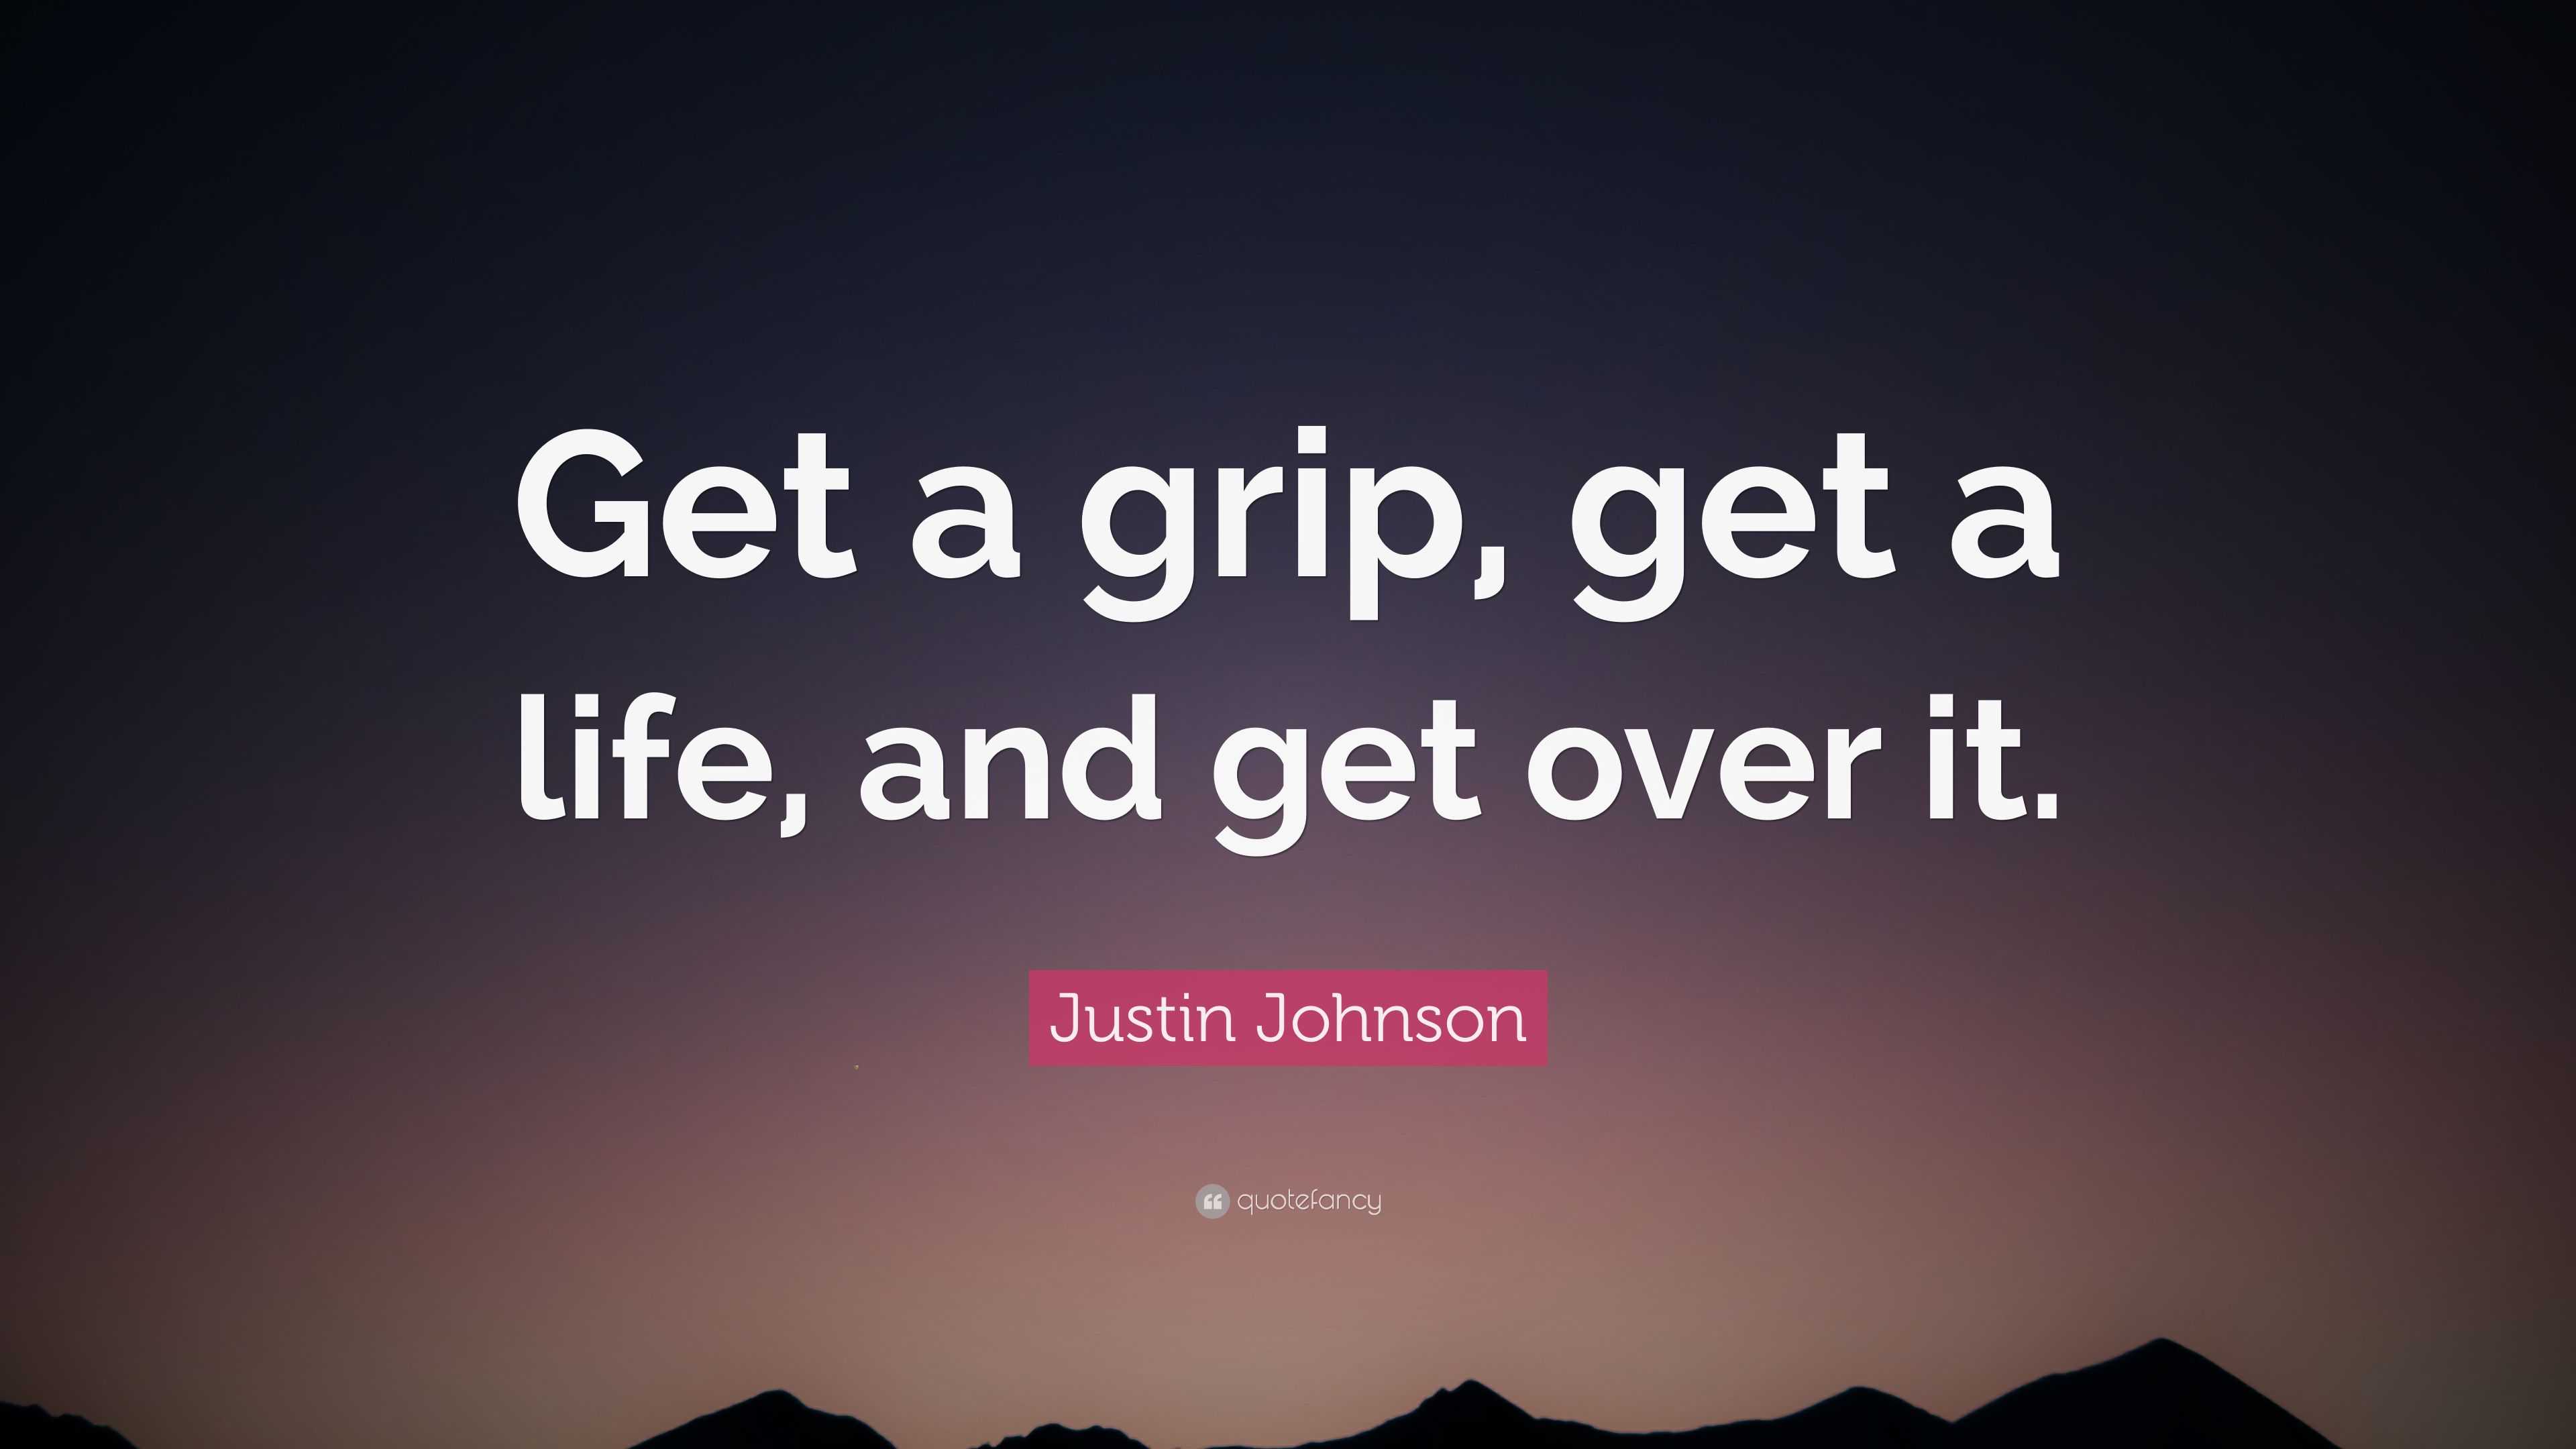 Justin Johnson Quote: “Get a grip, get a life, and get over it.”